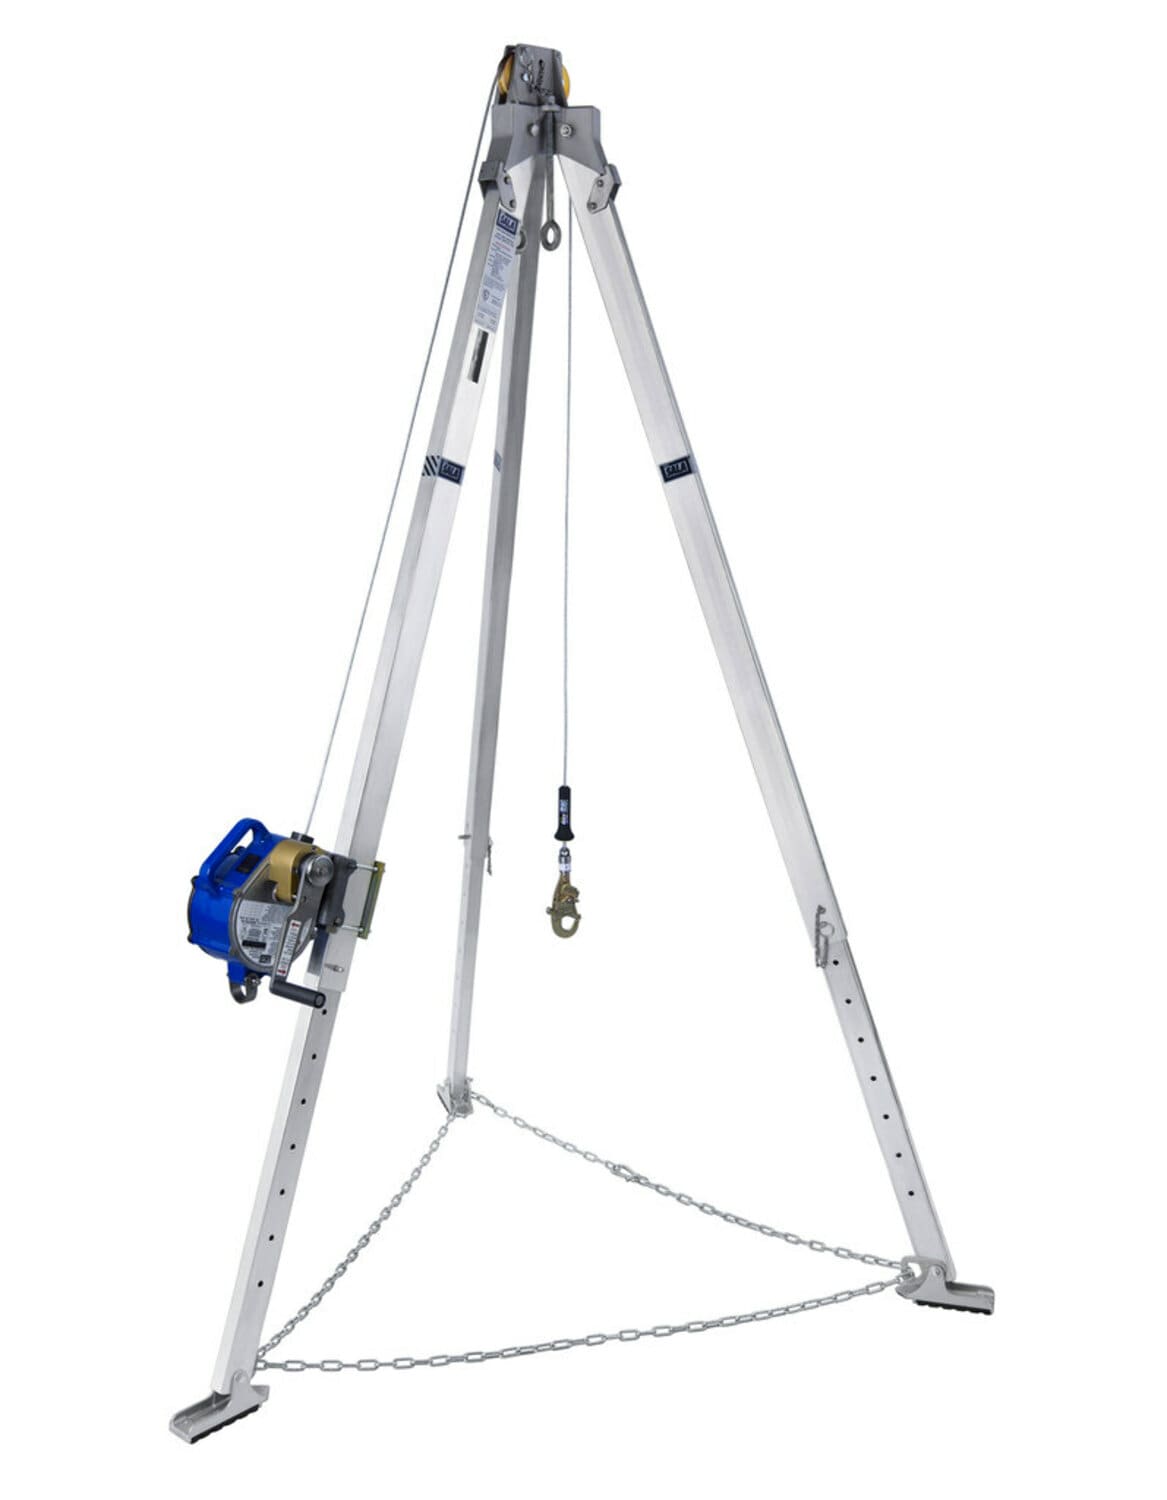 7012693285 - 3M DBI-SALA Confined Space Aluminum Tripod with 3-Way SRL 8301031, 7 ft High, 50 ft Stainless Steel Cable